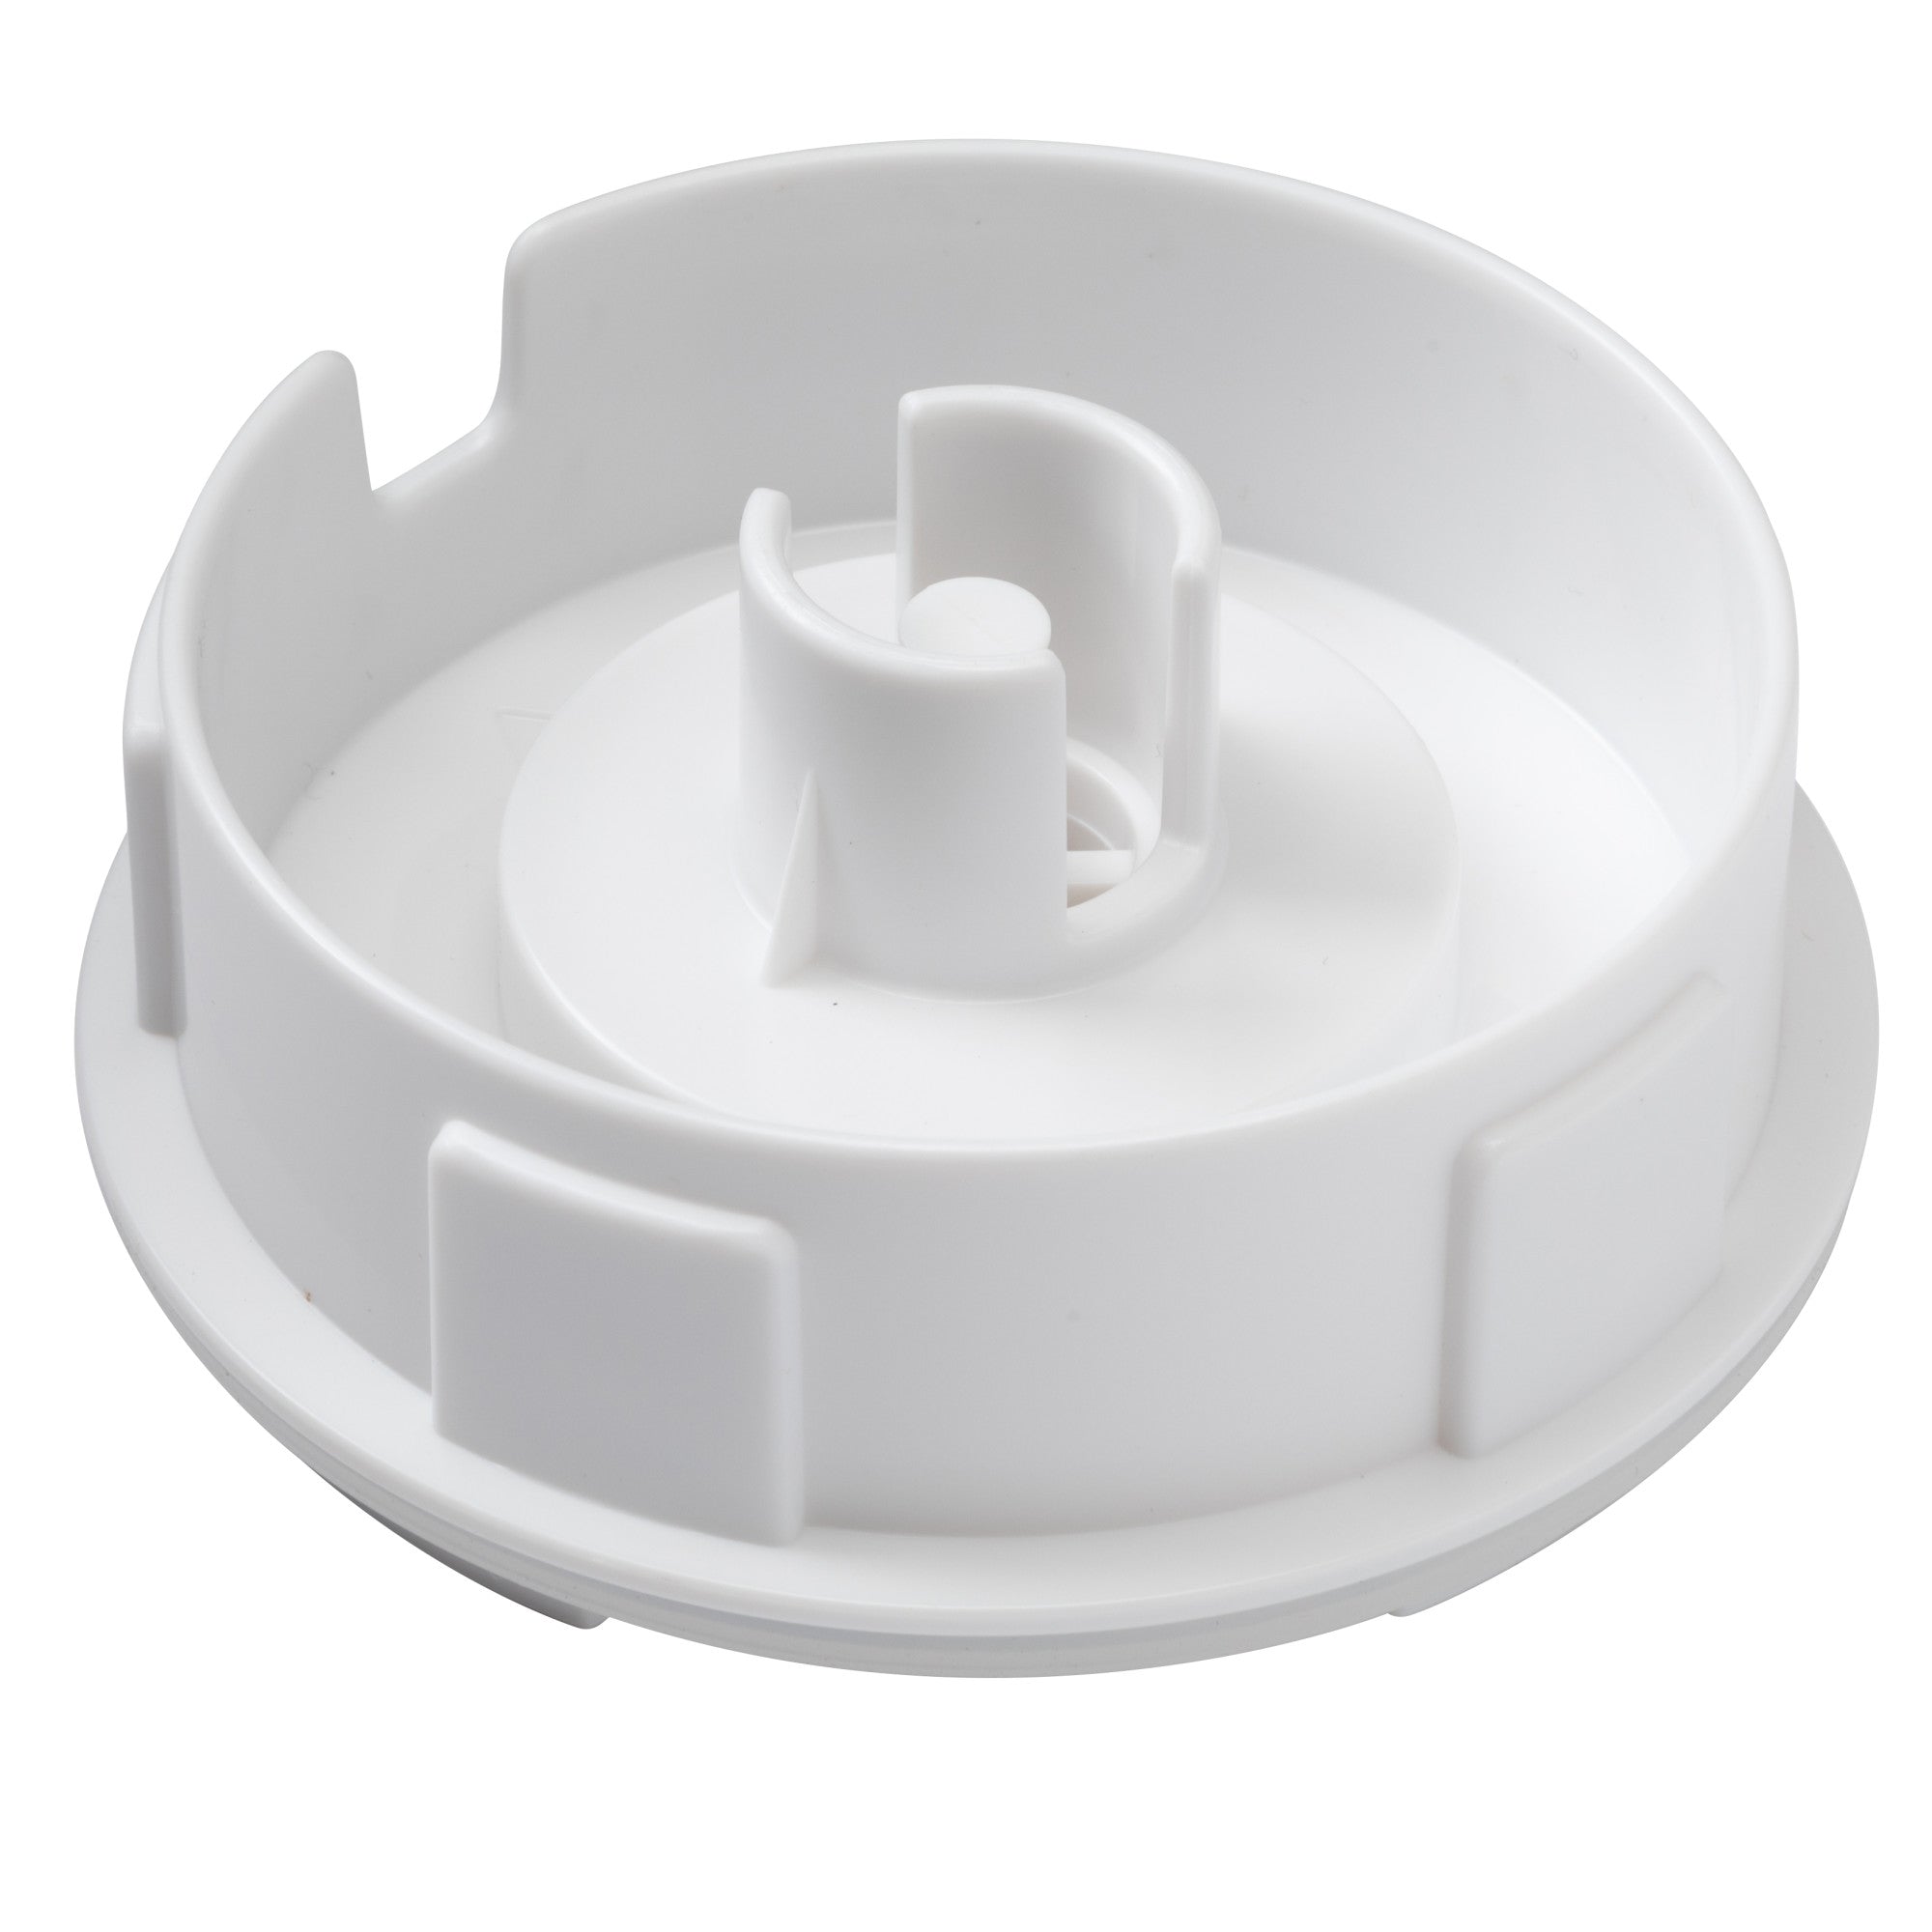 Stay Clean Humidifier Replacement Tank Cap